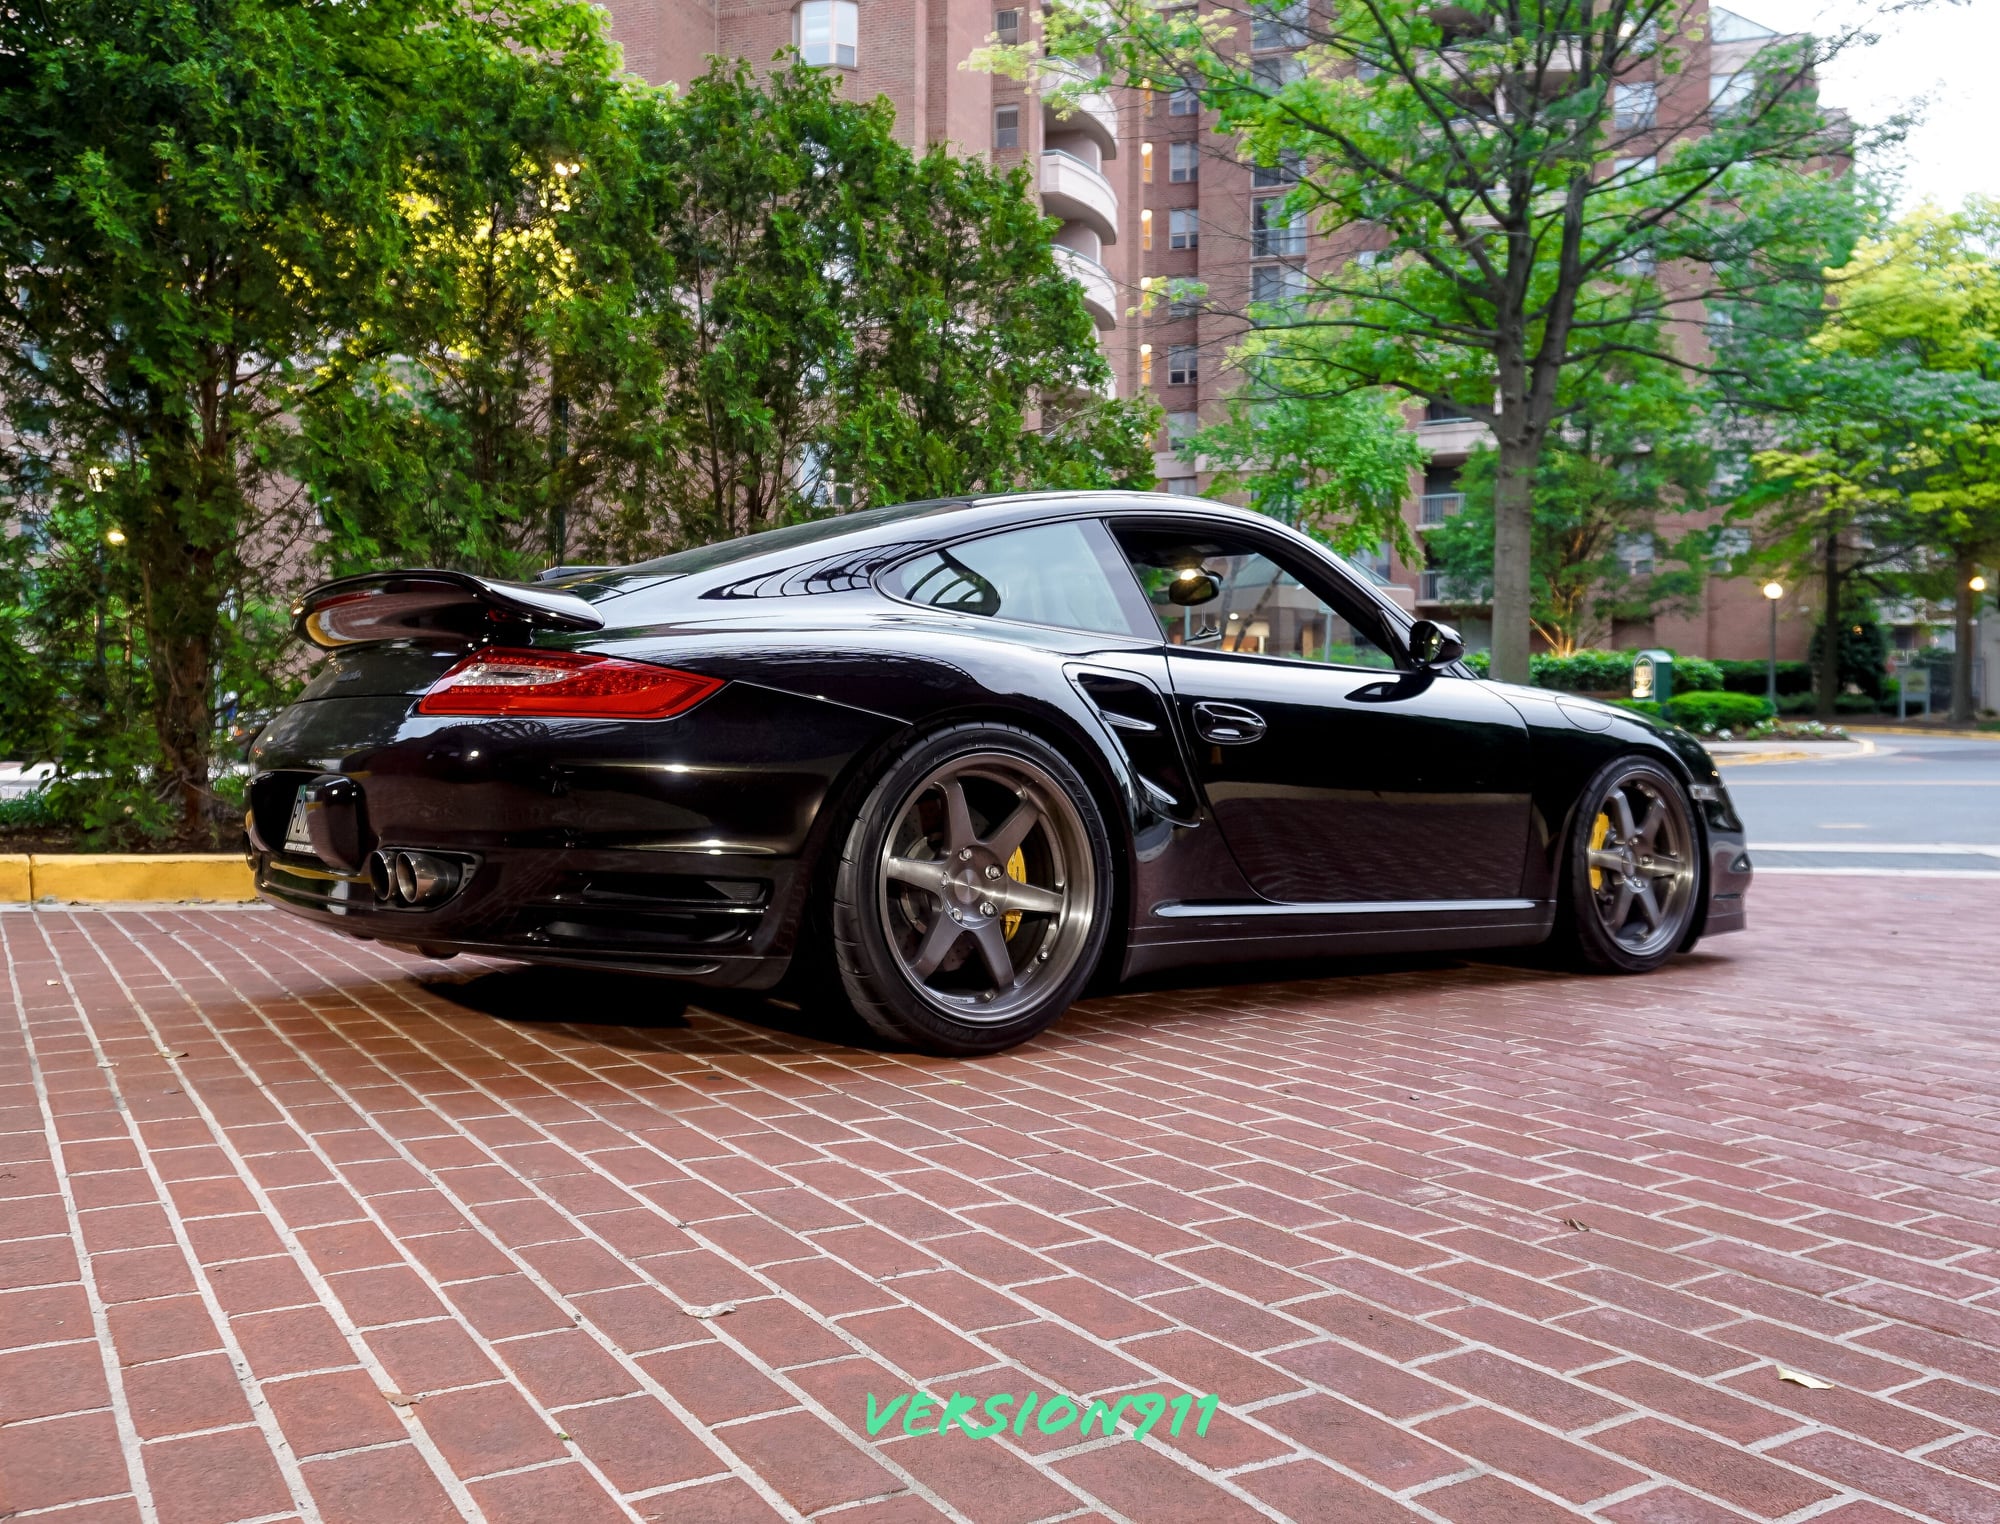 2007 Porsche 911 - 2007 997.1 911 Turbo COUPE / MANUAL - Used - VIN WP0AD29917S785276 - 57,601 Miles - 6 cyl - AWD - Manual - Coupe - Black - Dc, DC 20002, United States